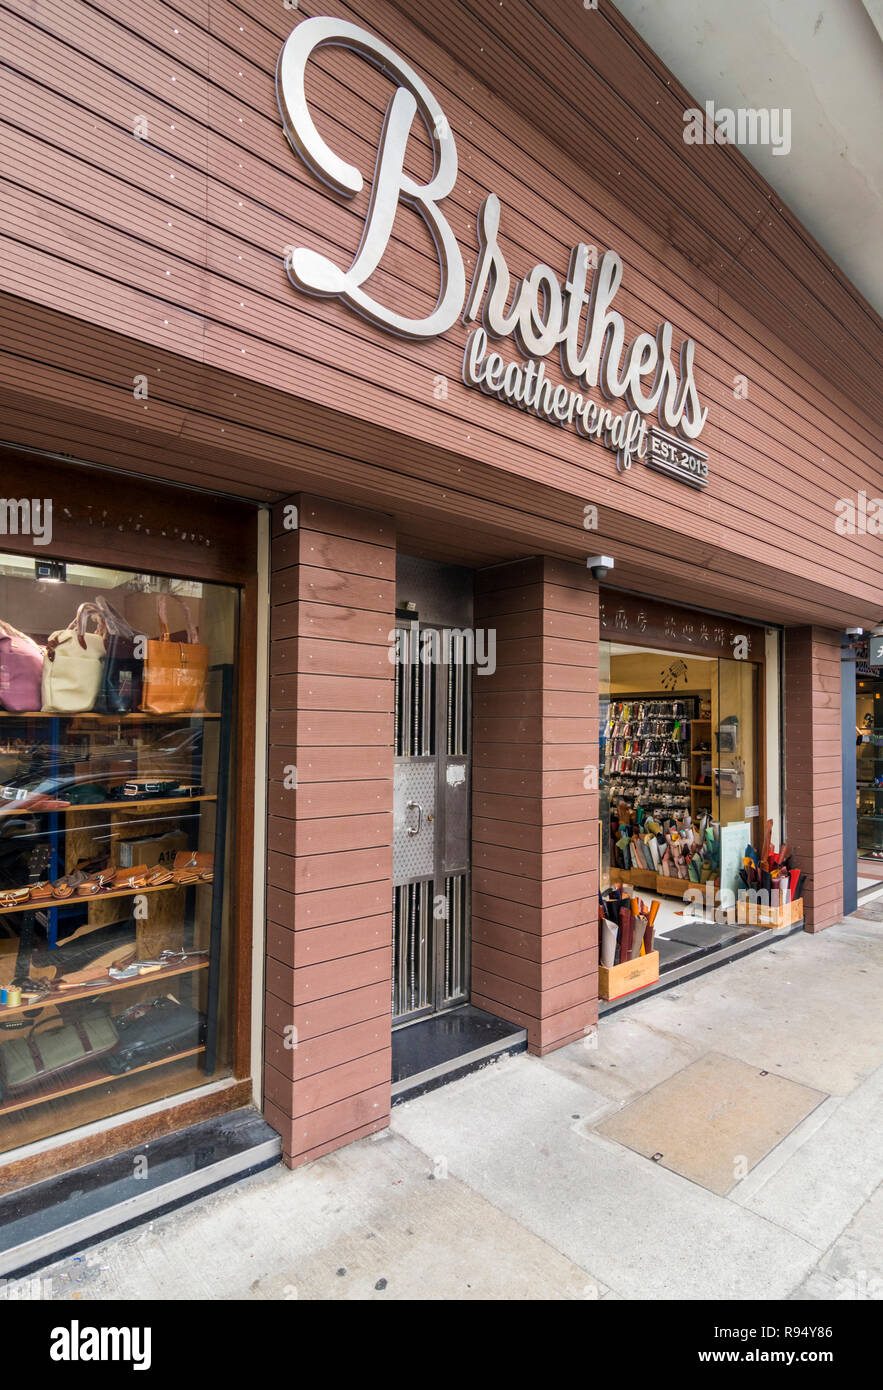 Brothers Leathercraft store, one of the new artisans bringing leather goods back to Tai Nan Street, Sham Shui Po, Kowloon, Hong Kong Stock Photo